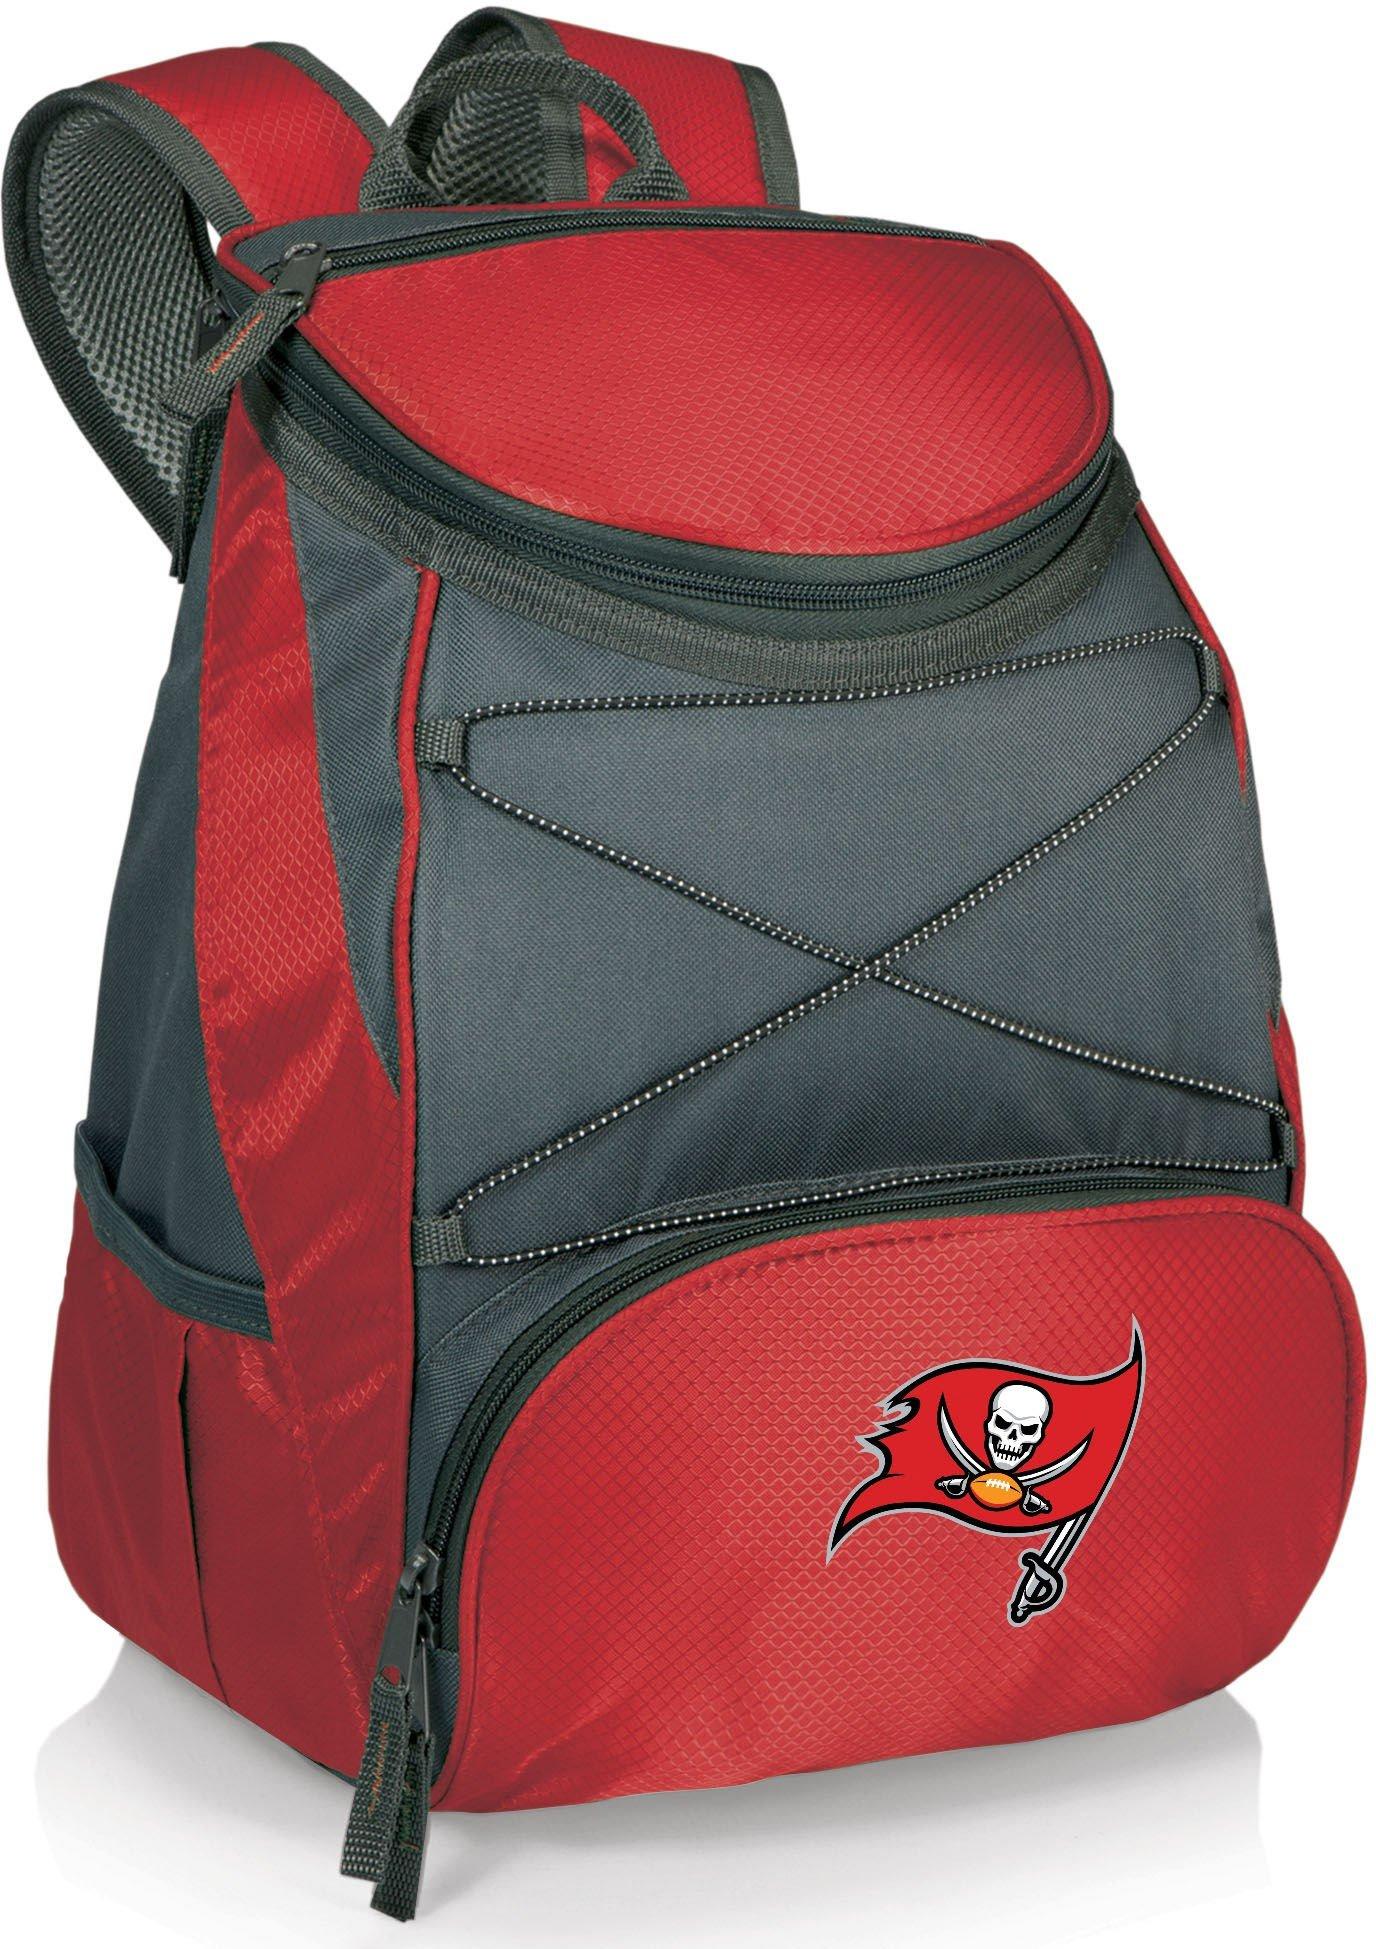 Tampa Bay Buccaneers PTX Backpack by Oniva